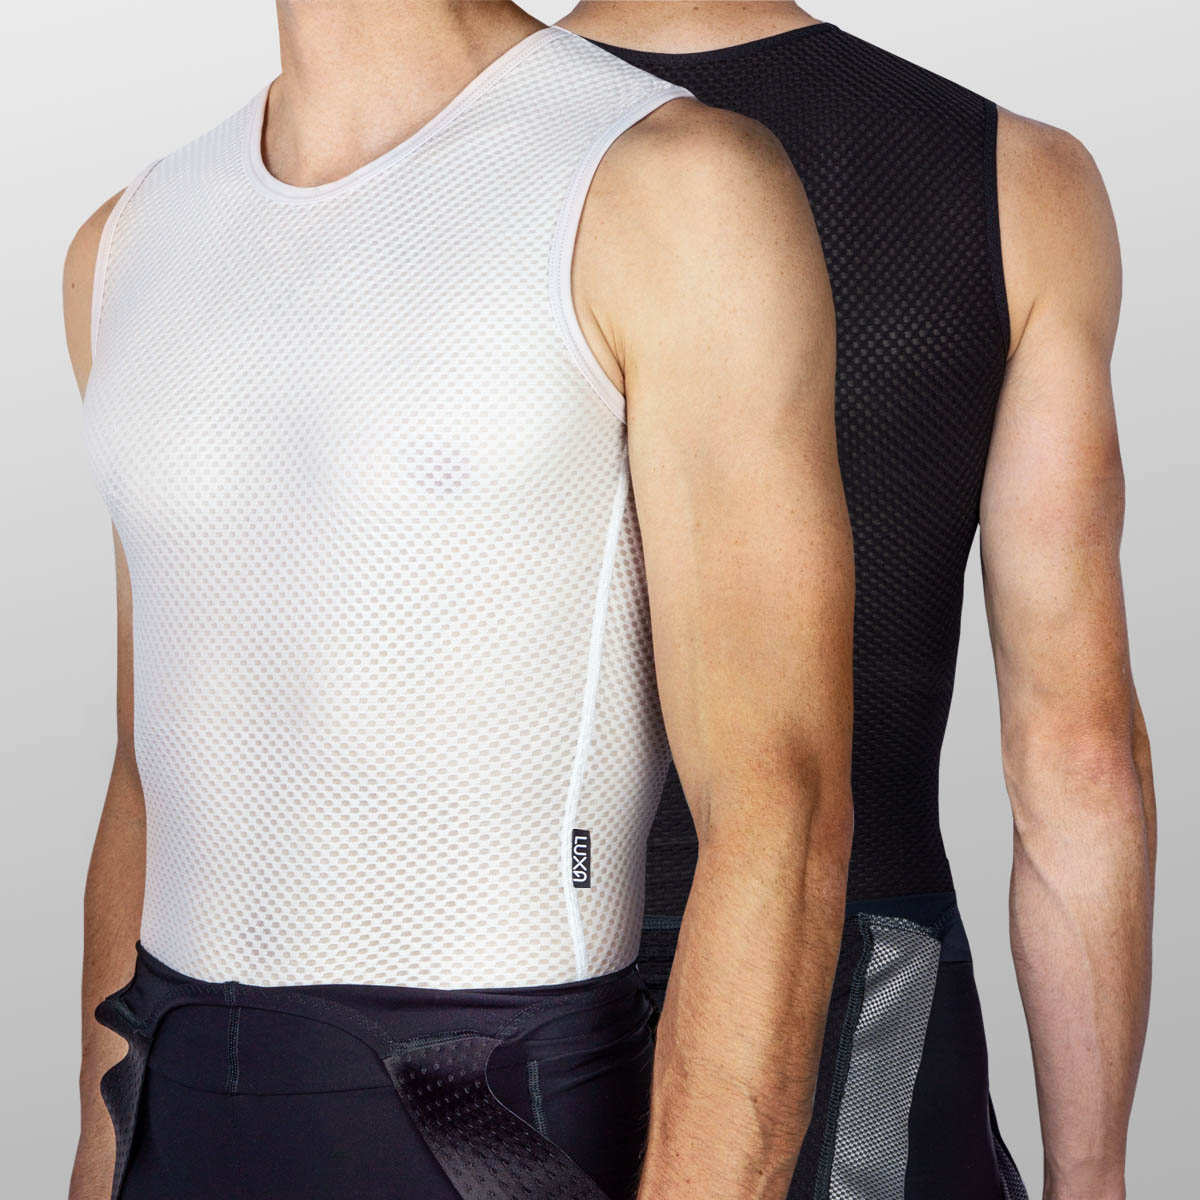 summer base layers in two colors. Perfect to wear in every season under your jersey or long sleeve